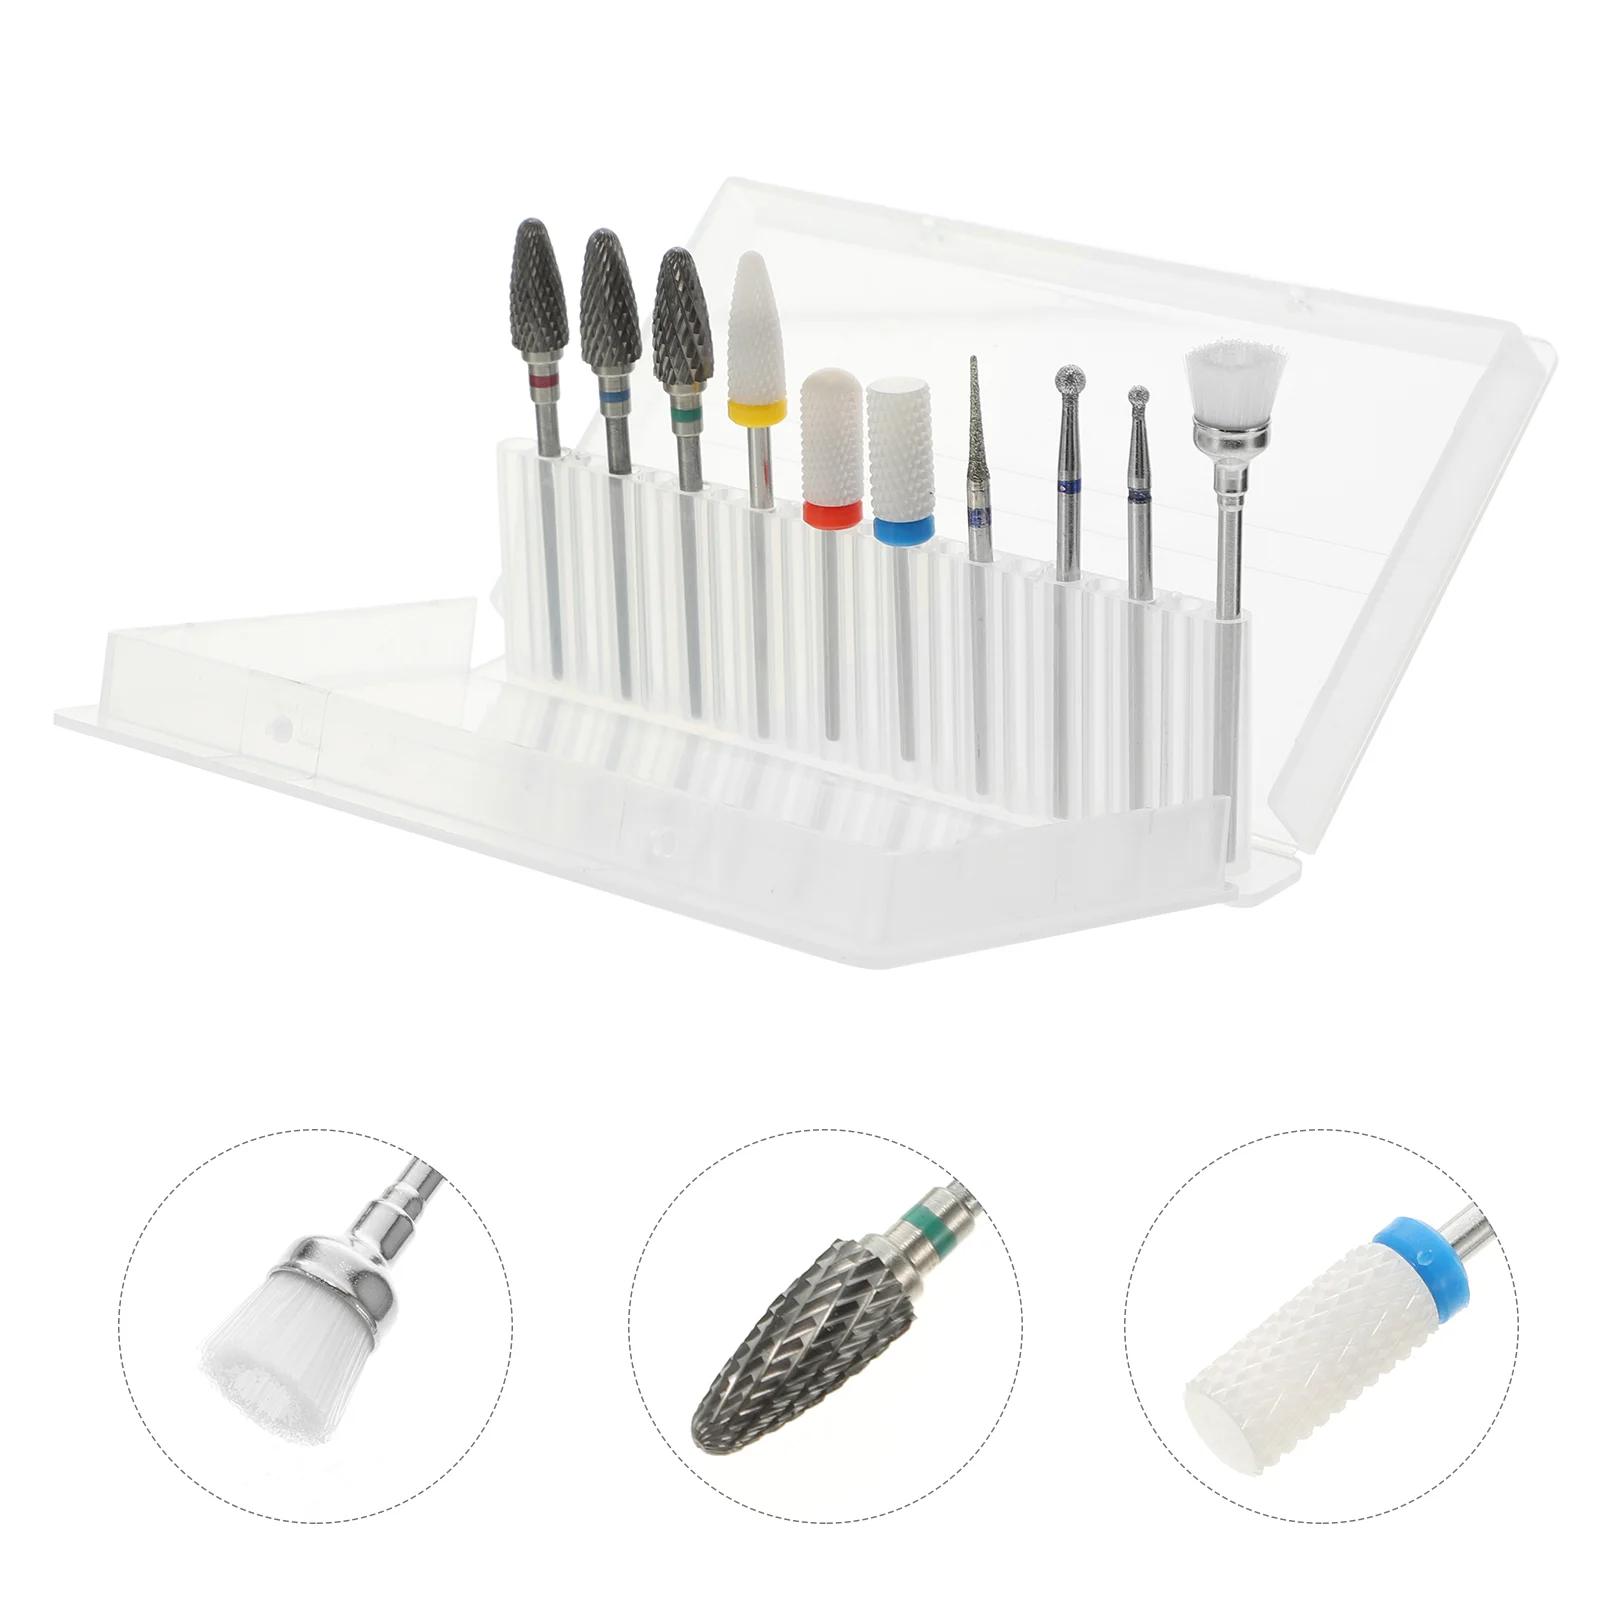 

10 Pcs Grinding Head Set Manicure Tools Nail Polishing Drill Bits Heads Tungsten Steel Alloy Accessories Grinder